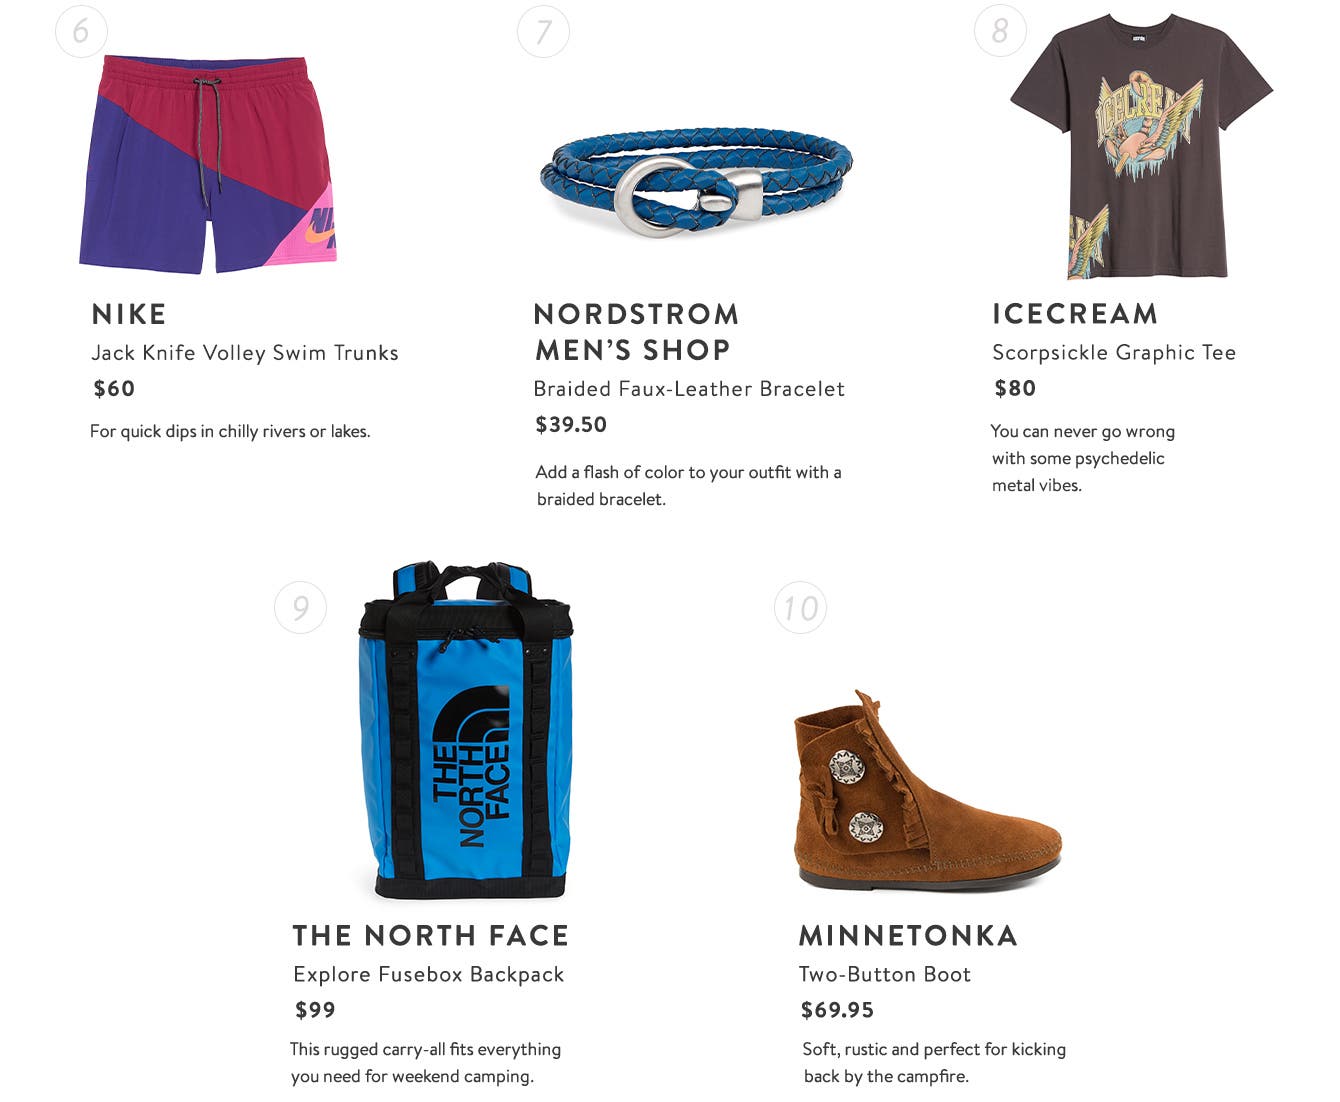 Nike Jack Knife Volley Swim Trunks. / Nordstrom Men’s Shop Braided Faux-Leather Bracelet. / Icecream Scorpsickle Graphic Tee. / The North Face Explore Fusebox Backpack. / Minnetonka Two-Button Boot.